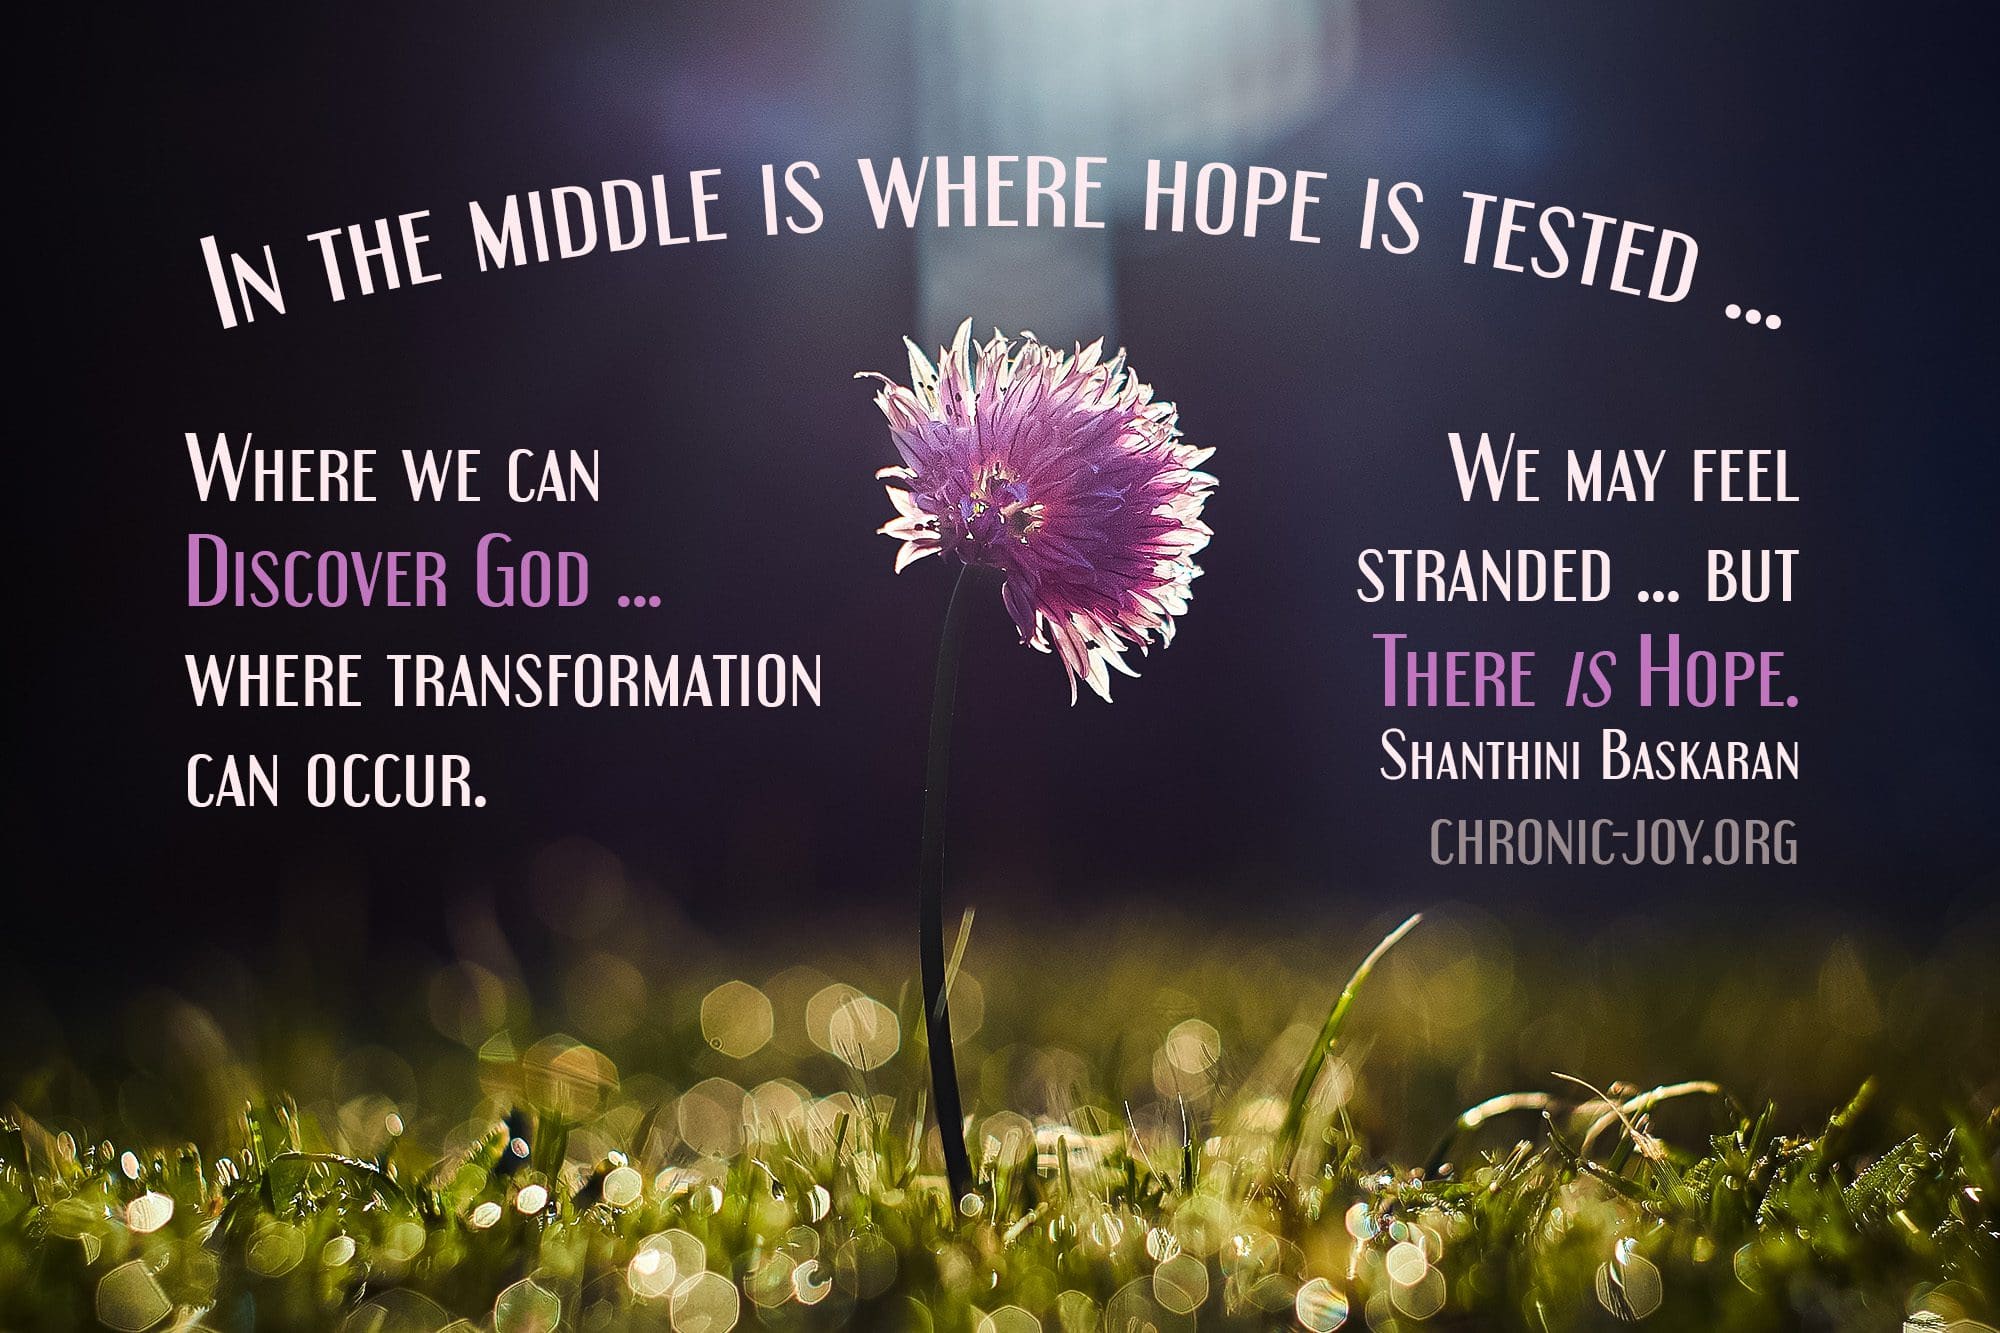 "In the middle is where hope is tested ... Where we can discover God ... where transformation can occur. We may feel stranded ... but there is hope." Shanthini Baskaran